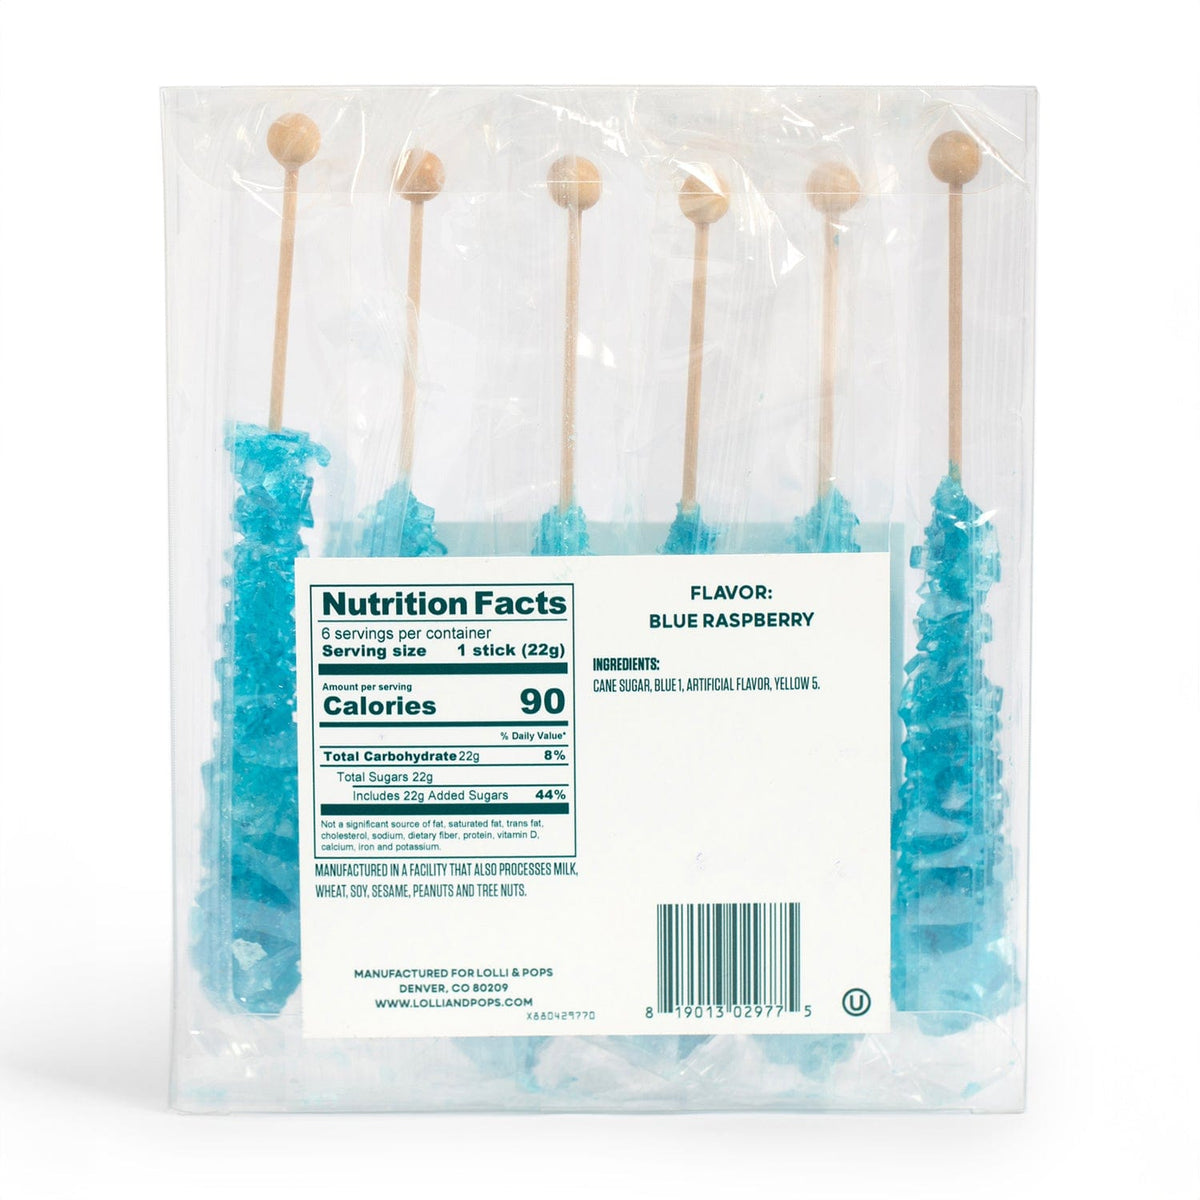 Lolli and Pops L&amp;P Collection True Blue Rock Candy Pack